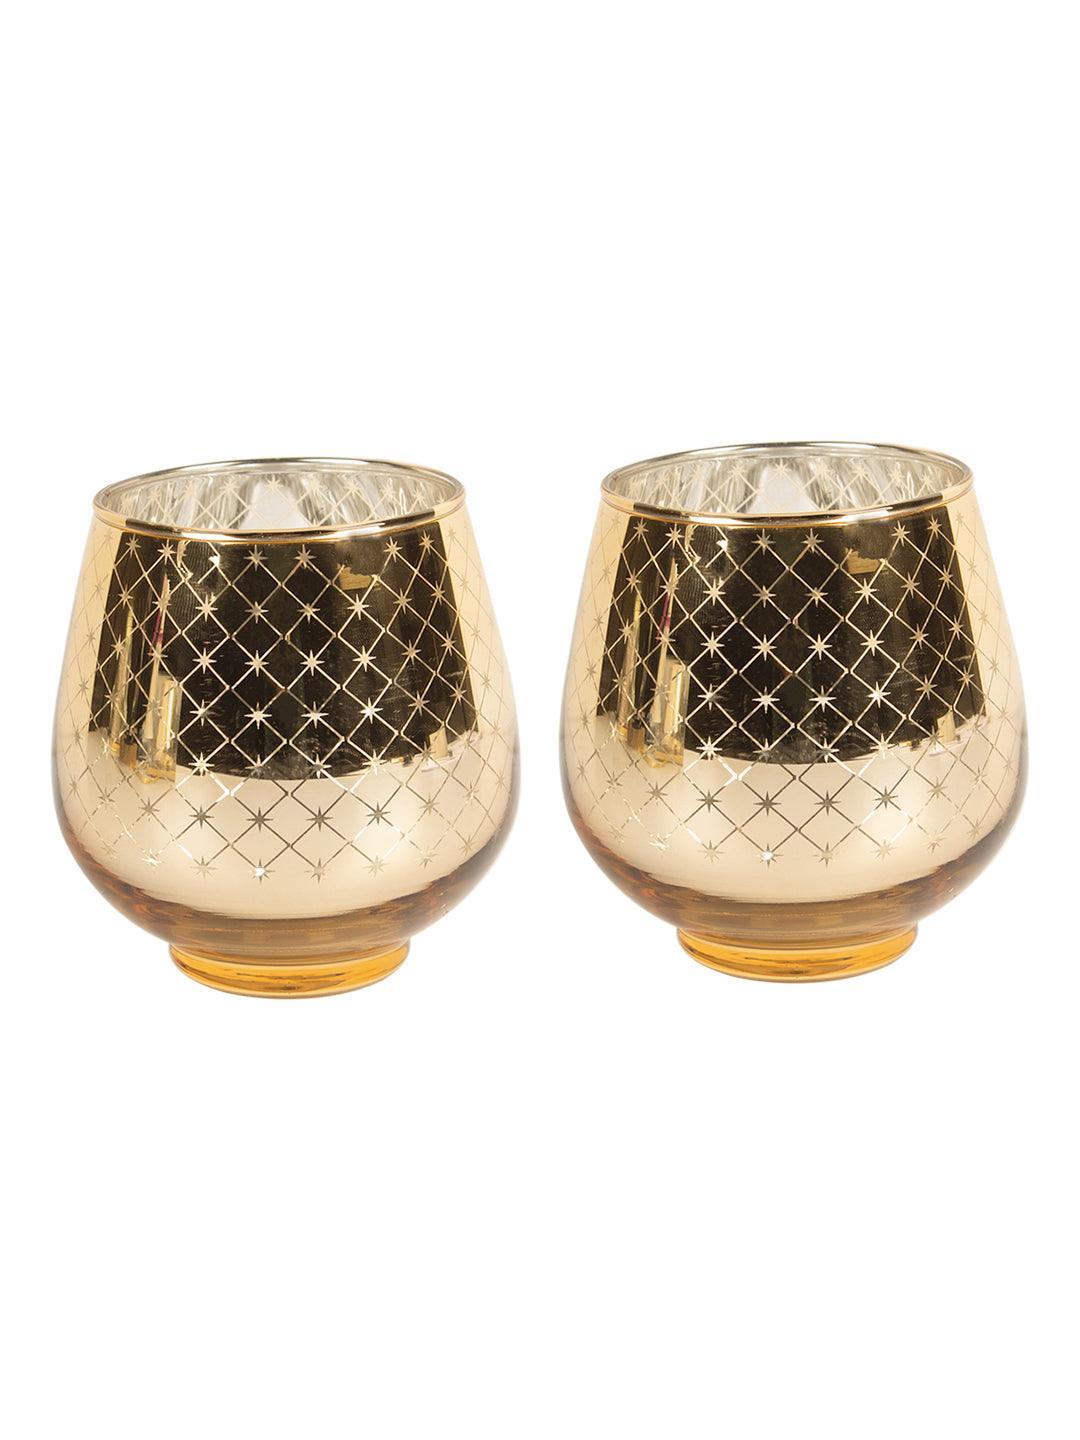 Diwali Tealight Candle Holders Pack Of 2 Pcs - MARKET 99